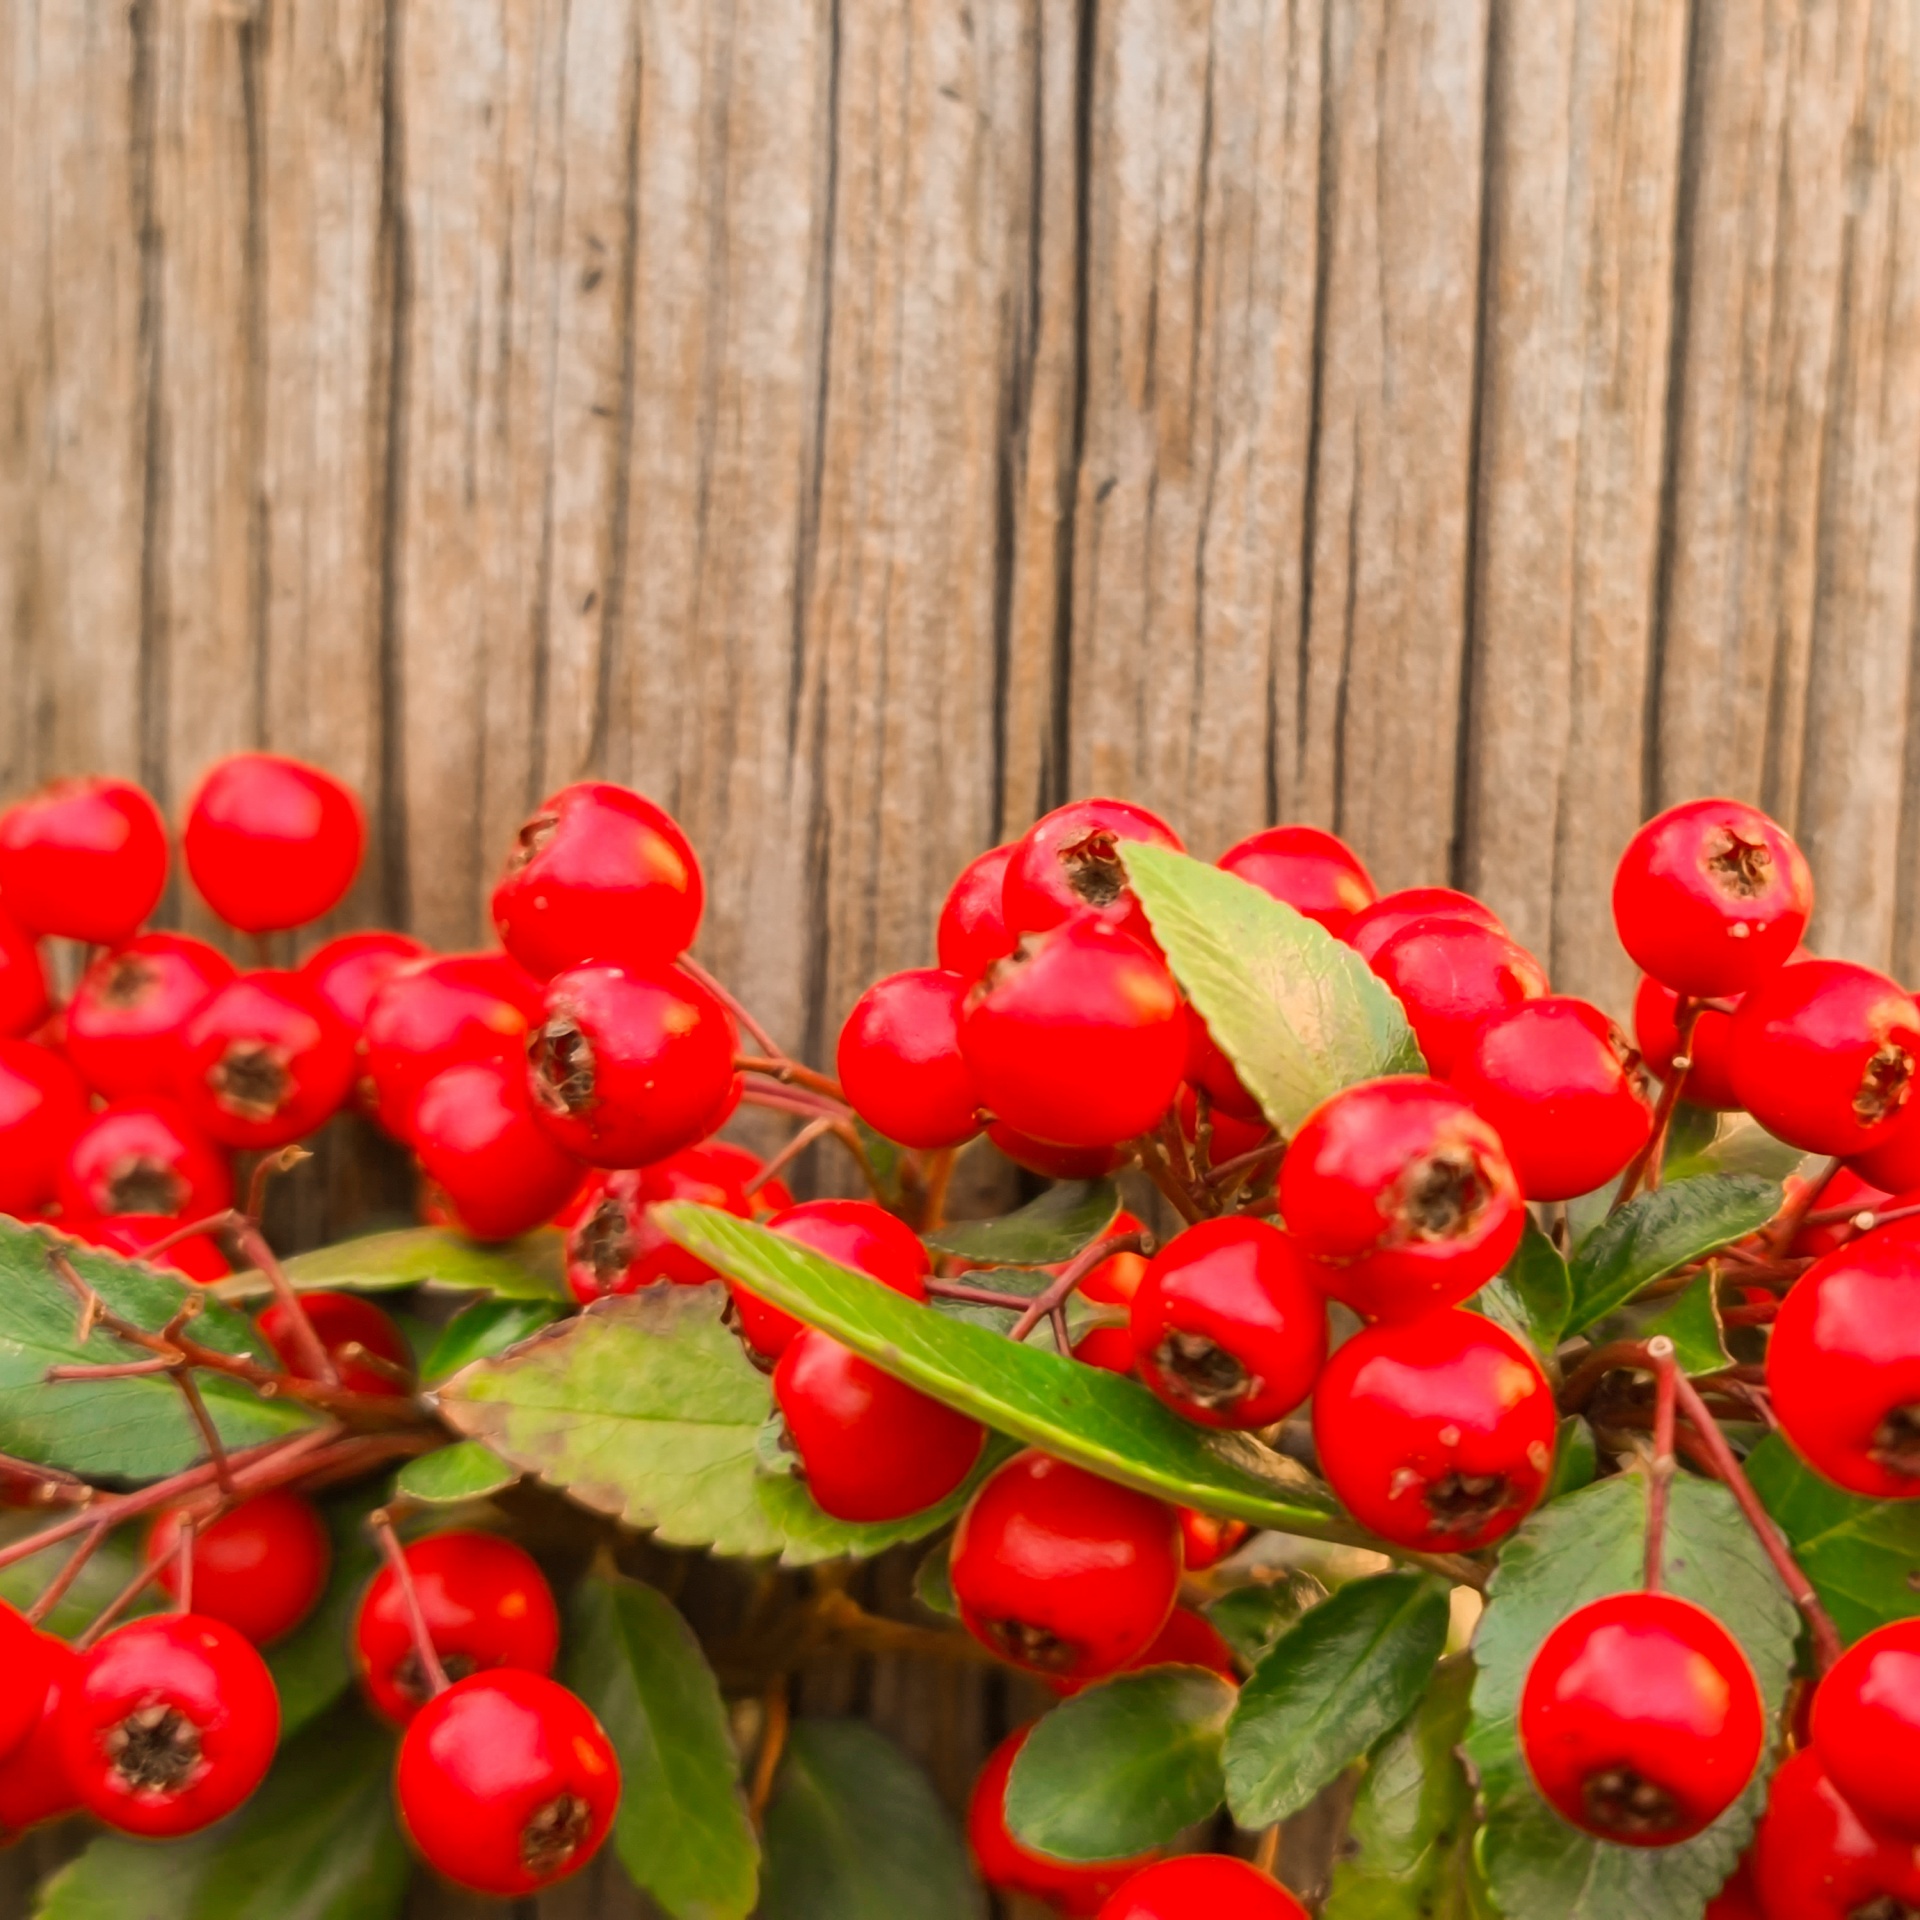 Red Berries On Wooden Background